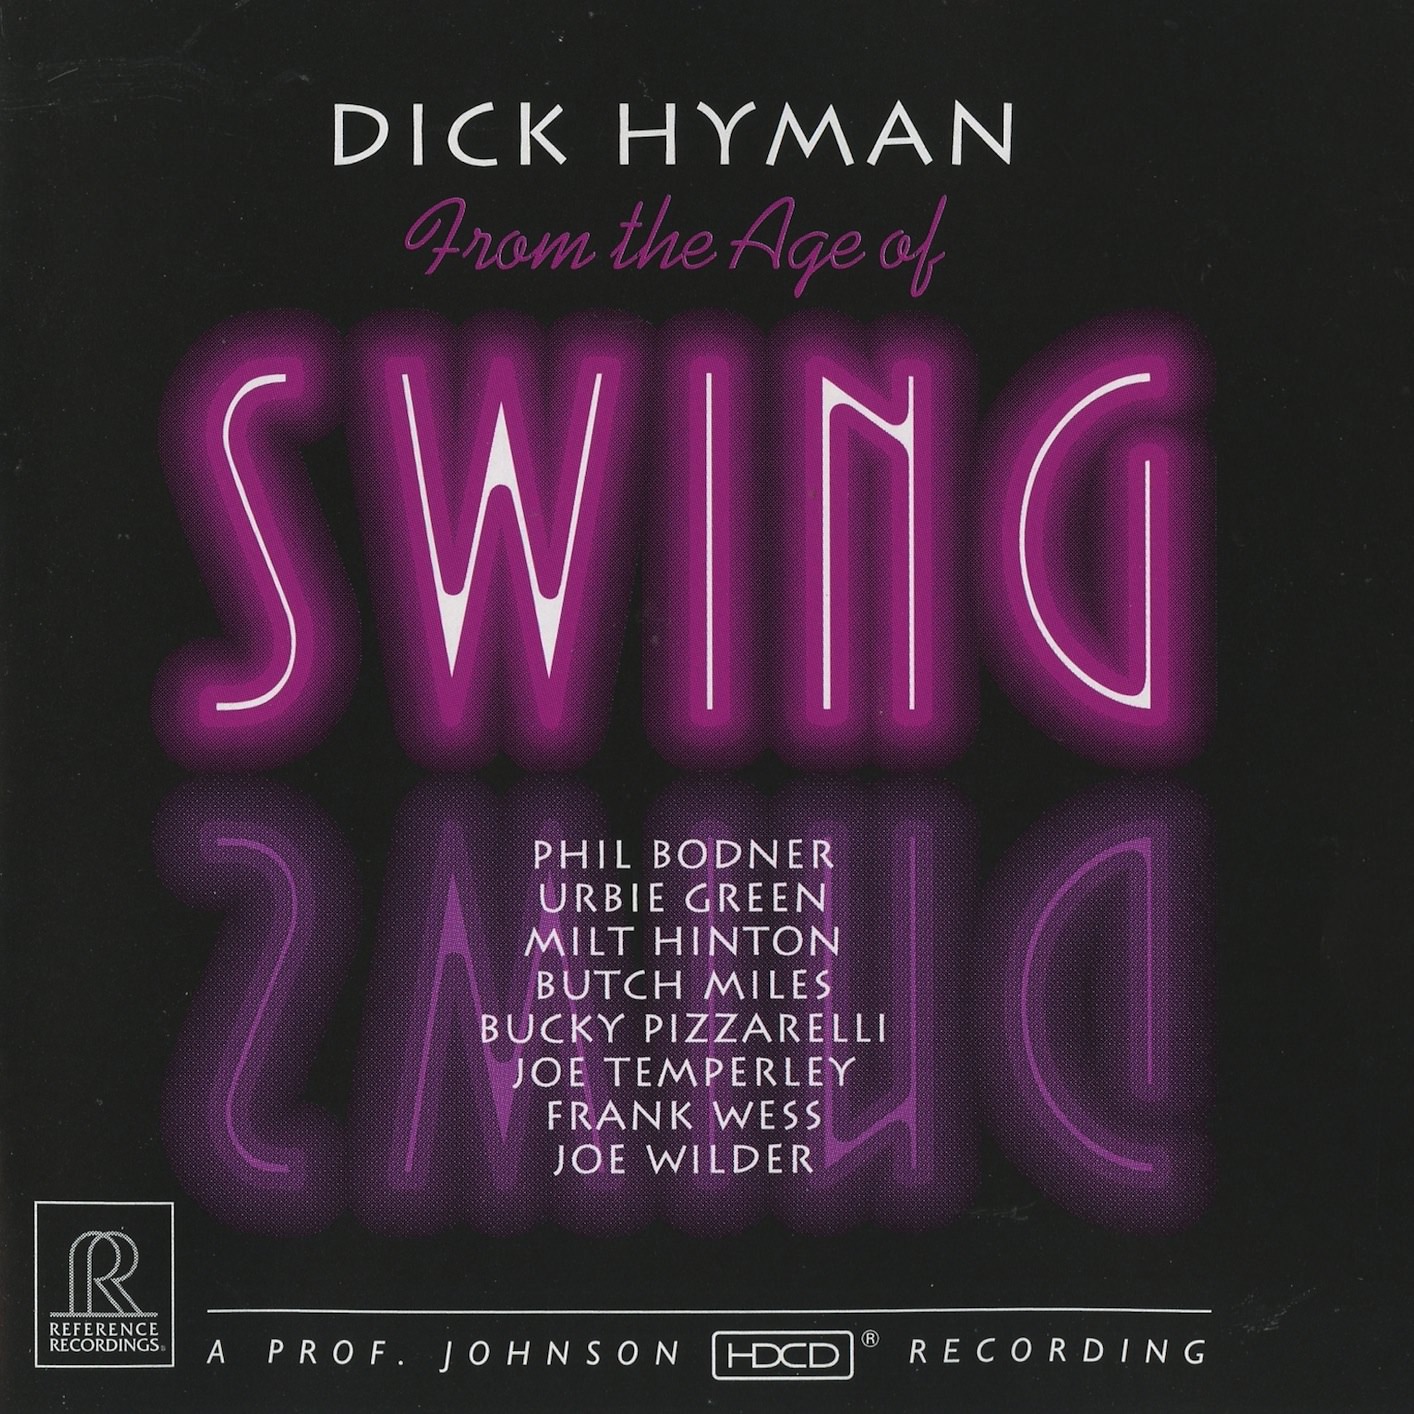 Dick Hyman - From The Age Of Swing (1994/2013) [AcousticSounds DSF DSD64/2.82MHz + FLAC 24bit/176,4kHz]